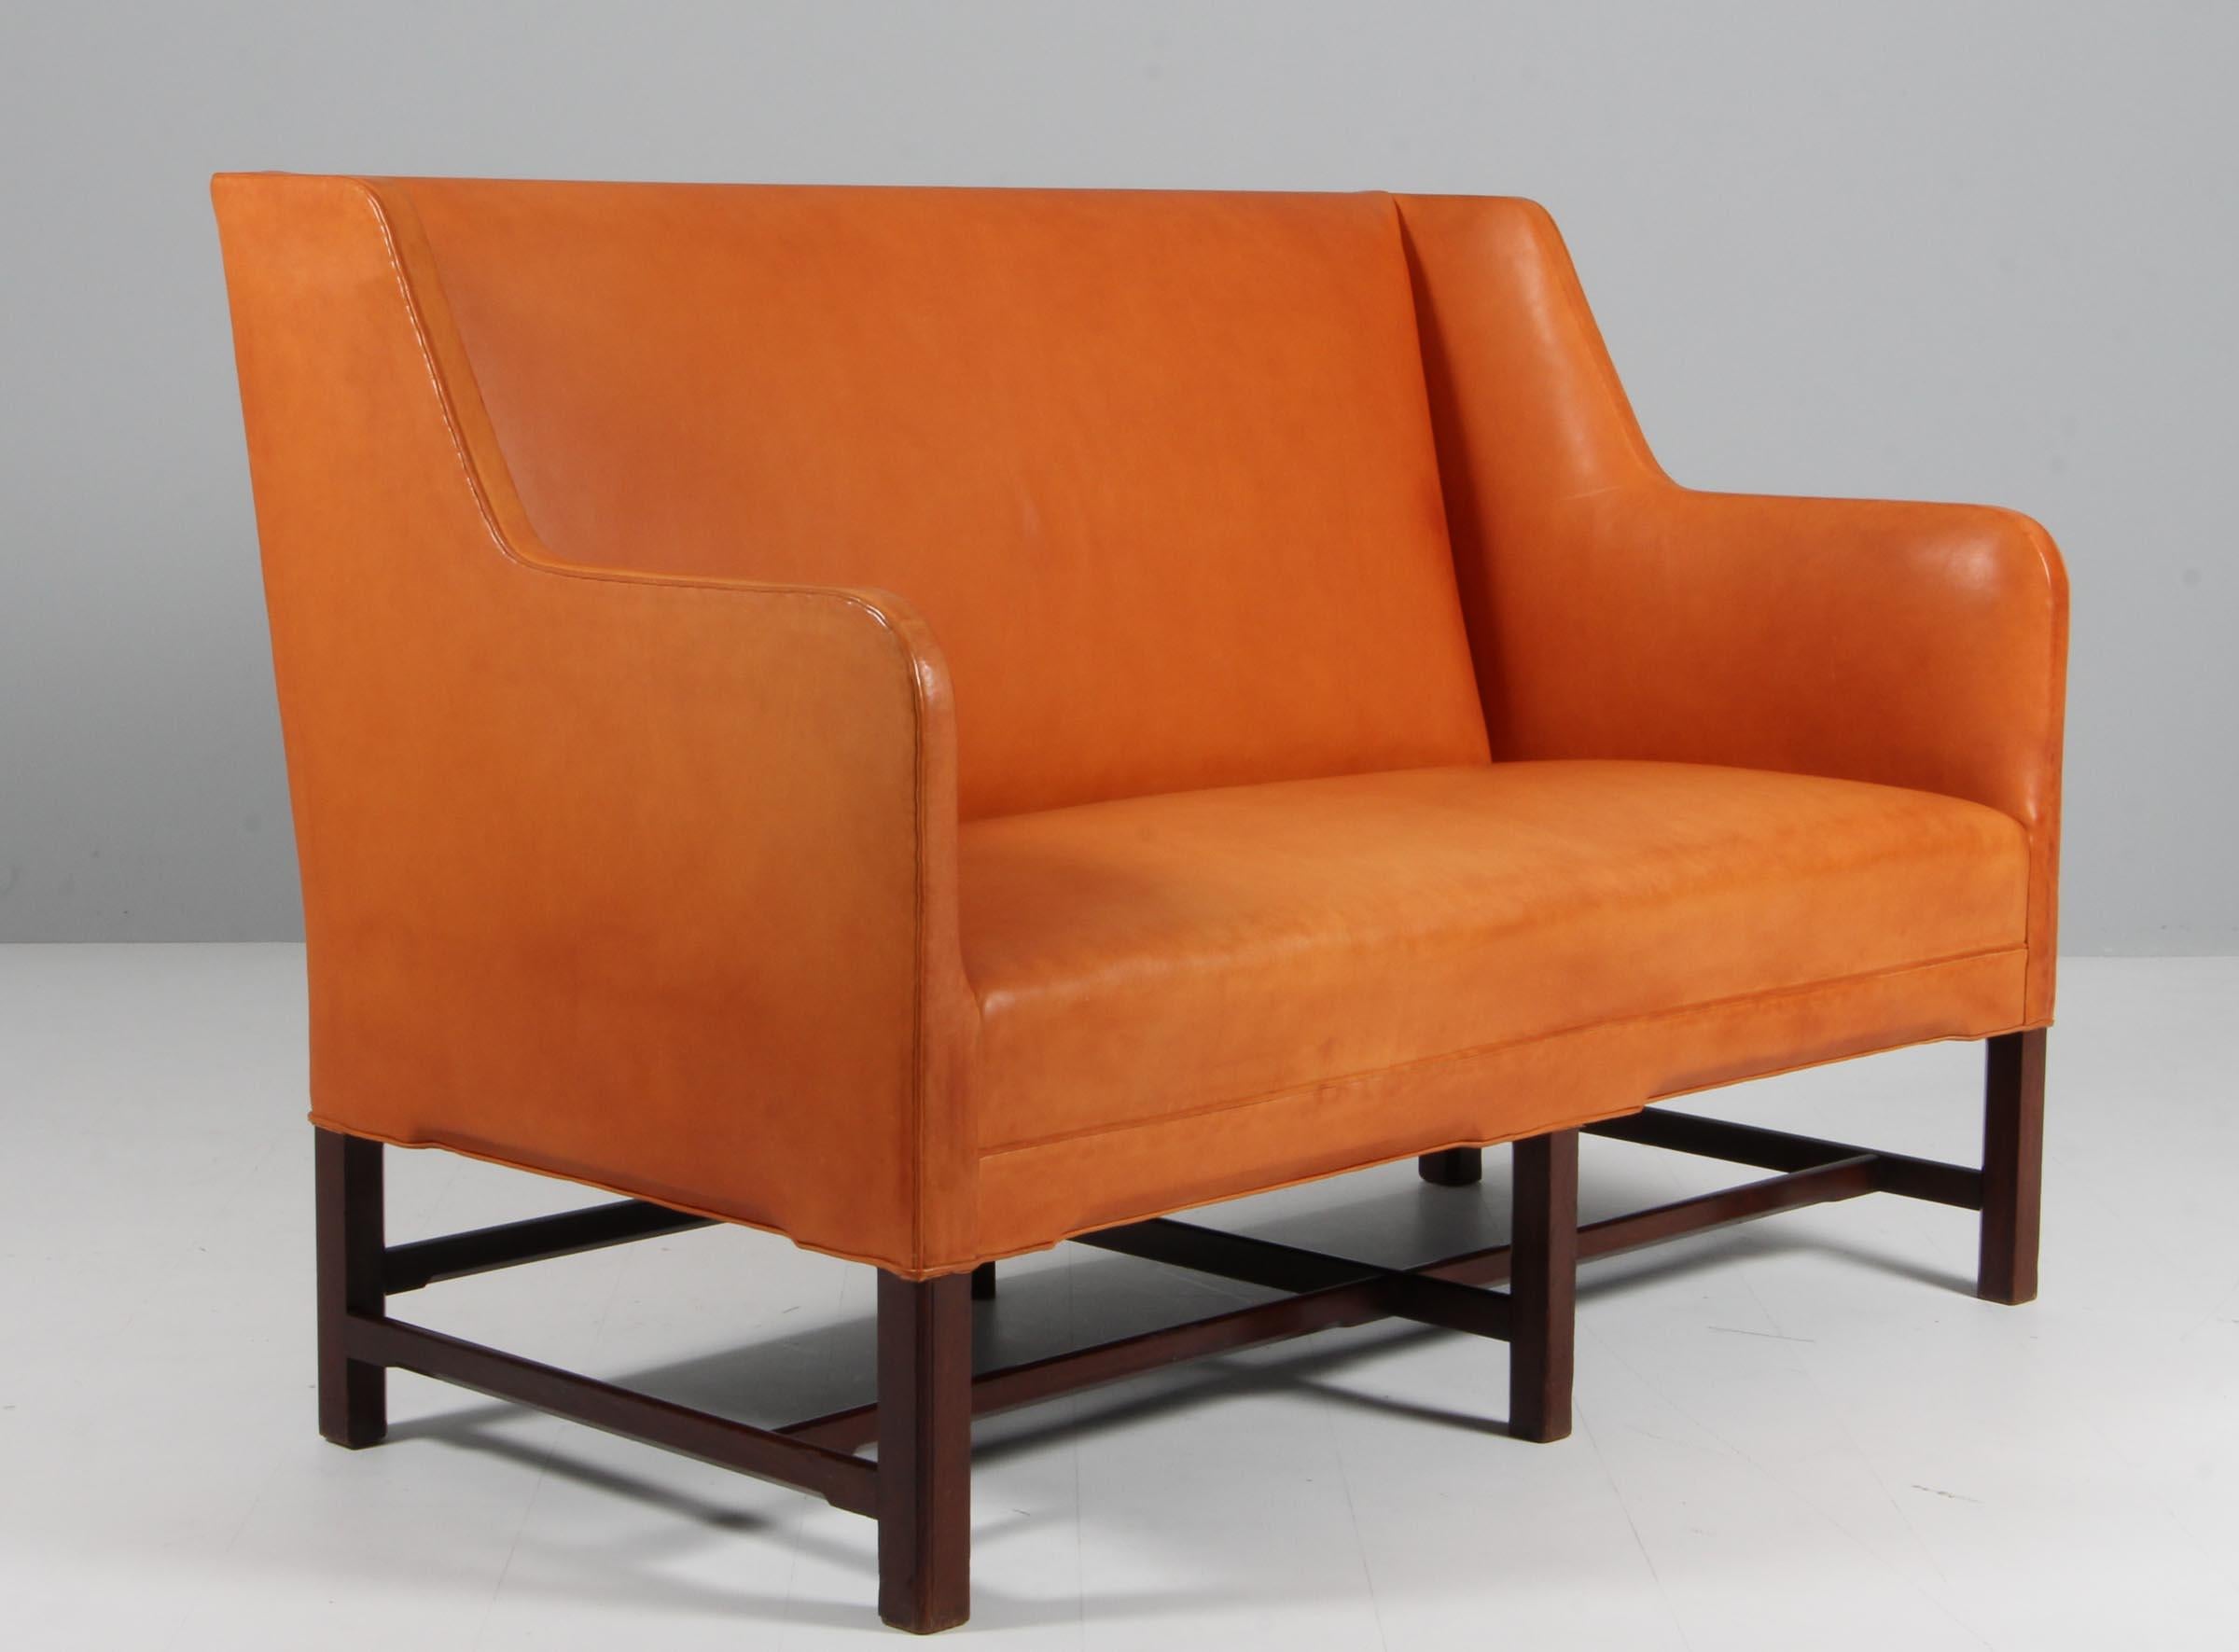 Very rare sofa model no 5011 designed by Kaare Klint. Produced by Rud. Rasmussen in Denmark. Original upholstered with patinated Niger leather.

